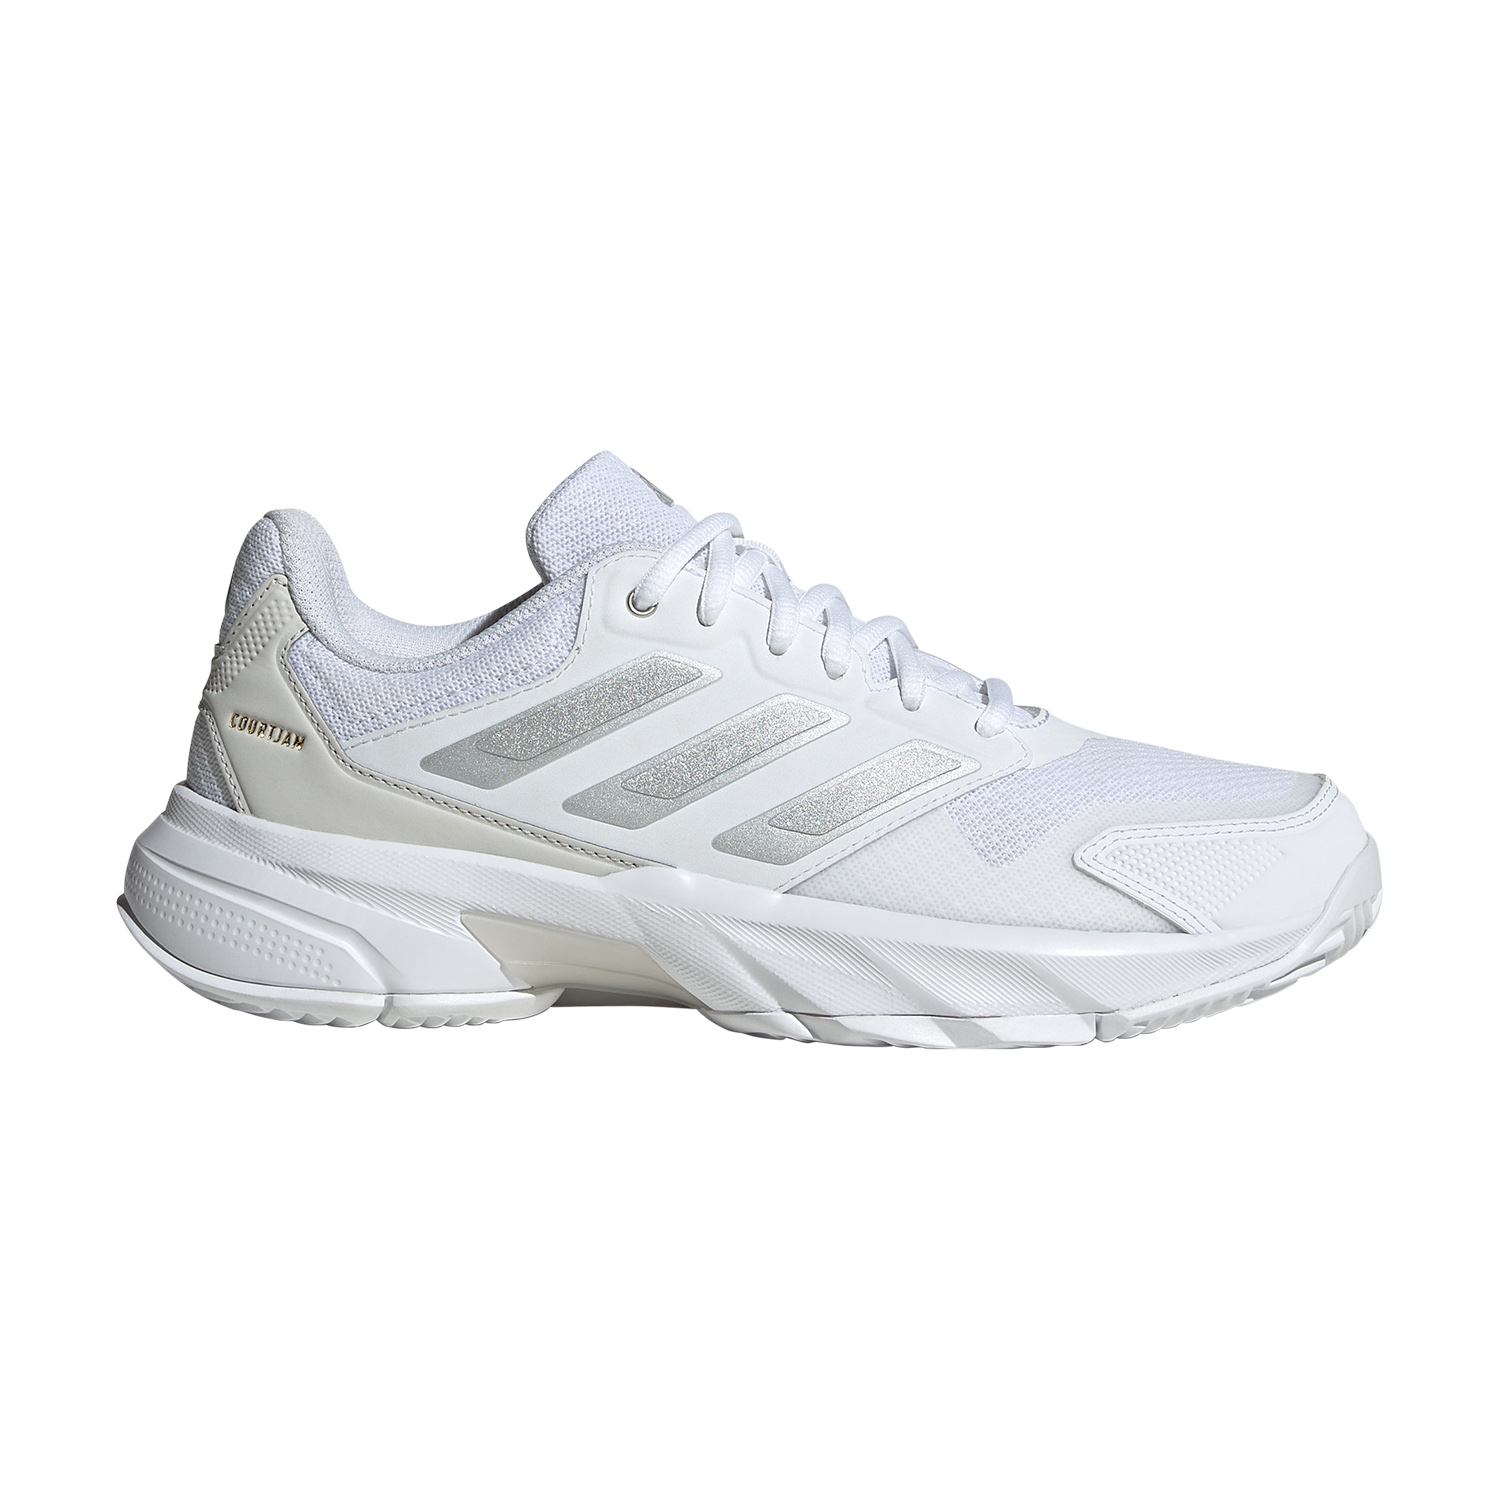 adidas Courtjam Control 3 - FTWR White/Silver Met/Grey One